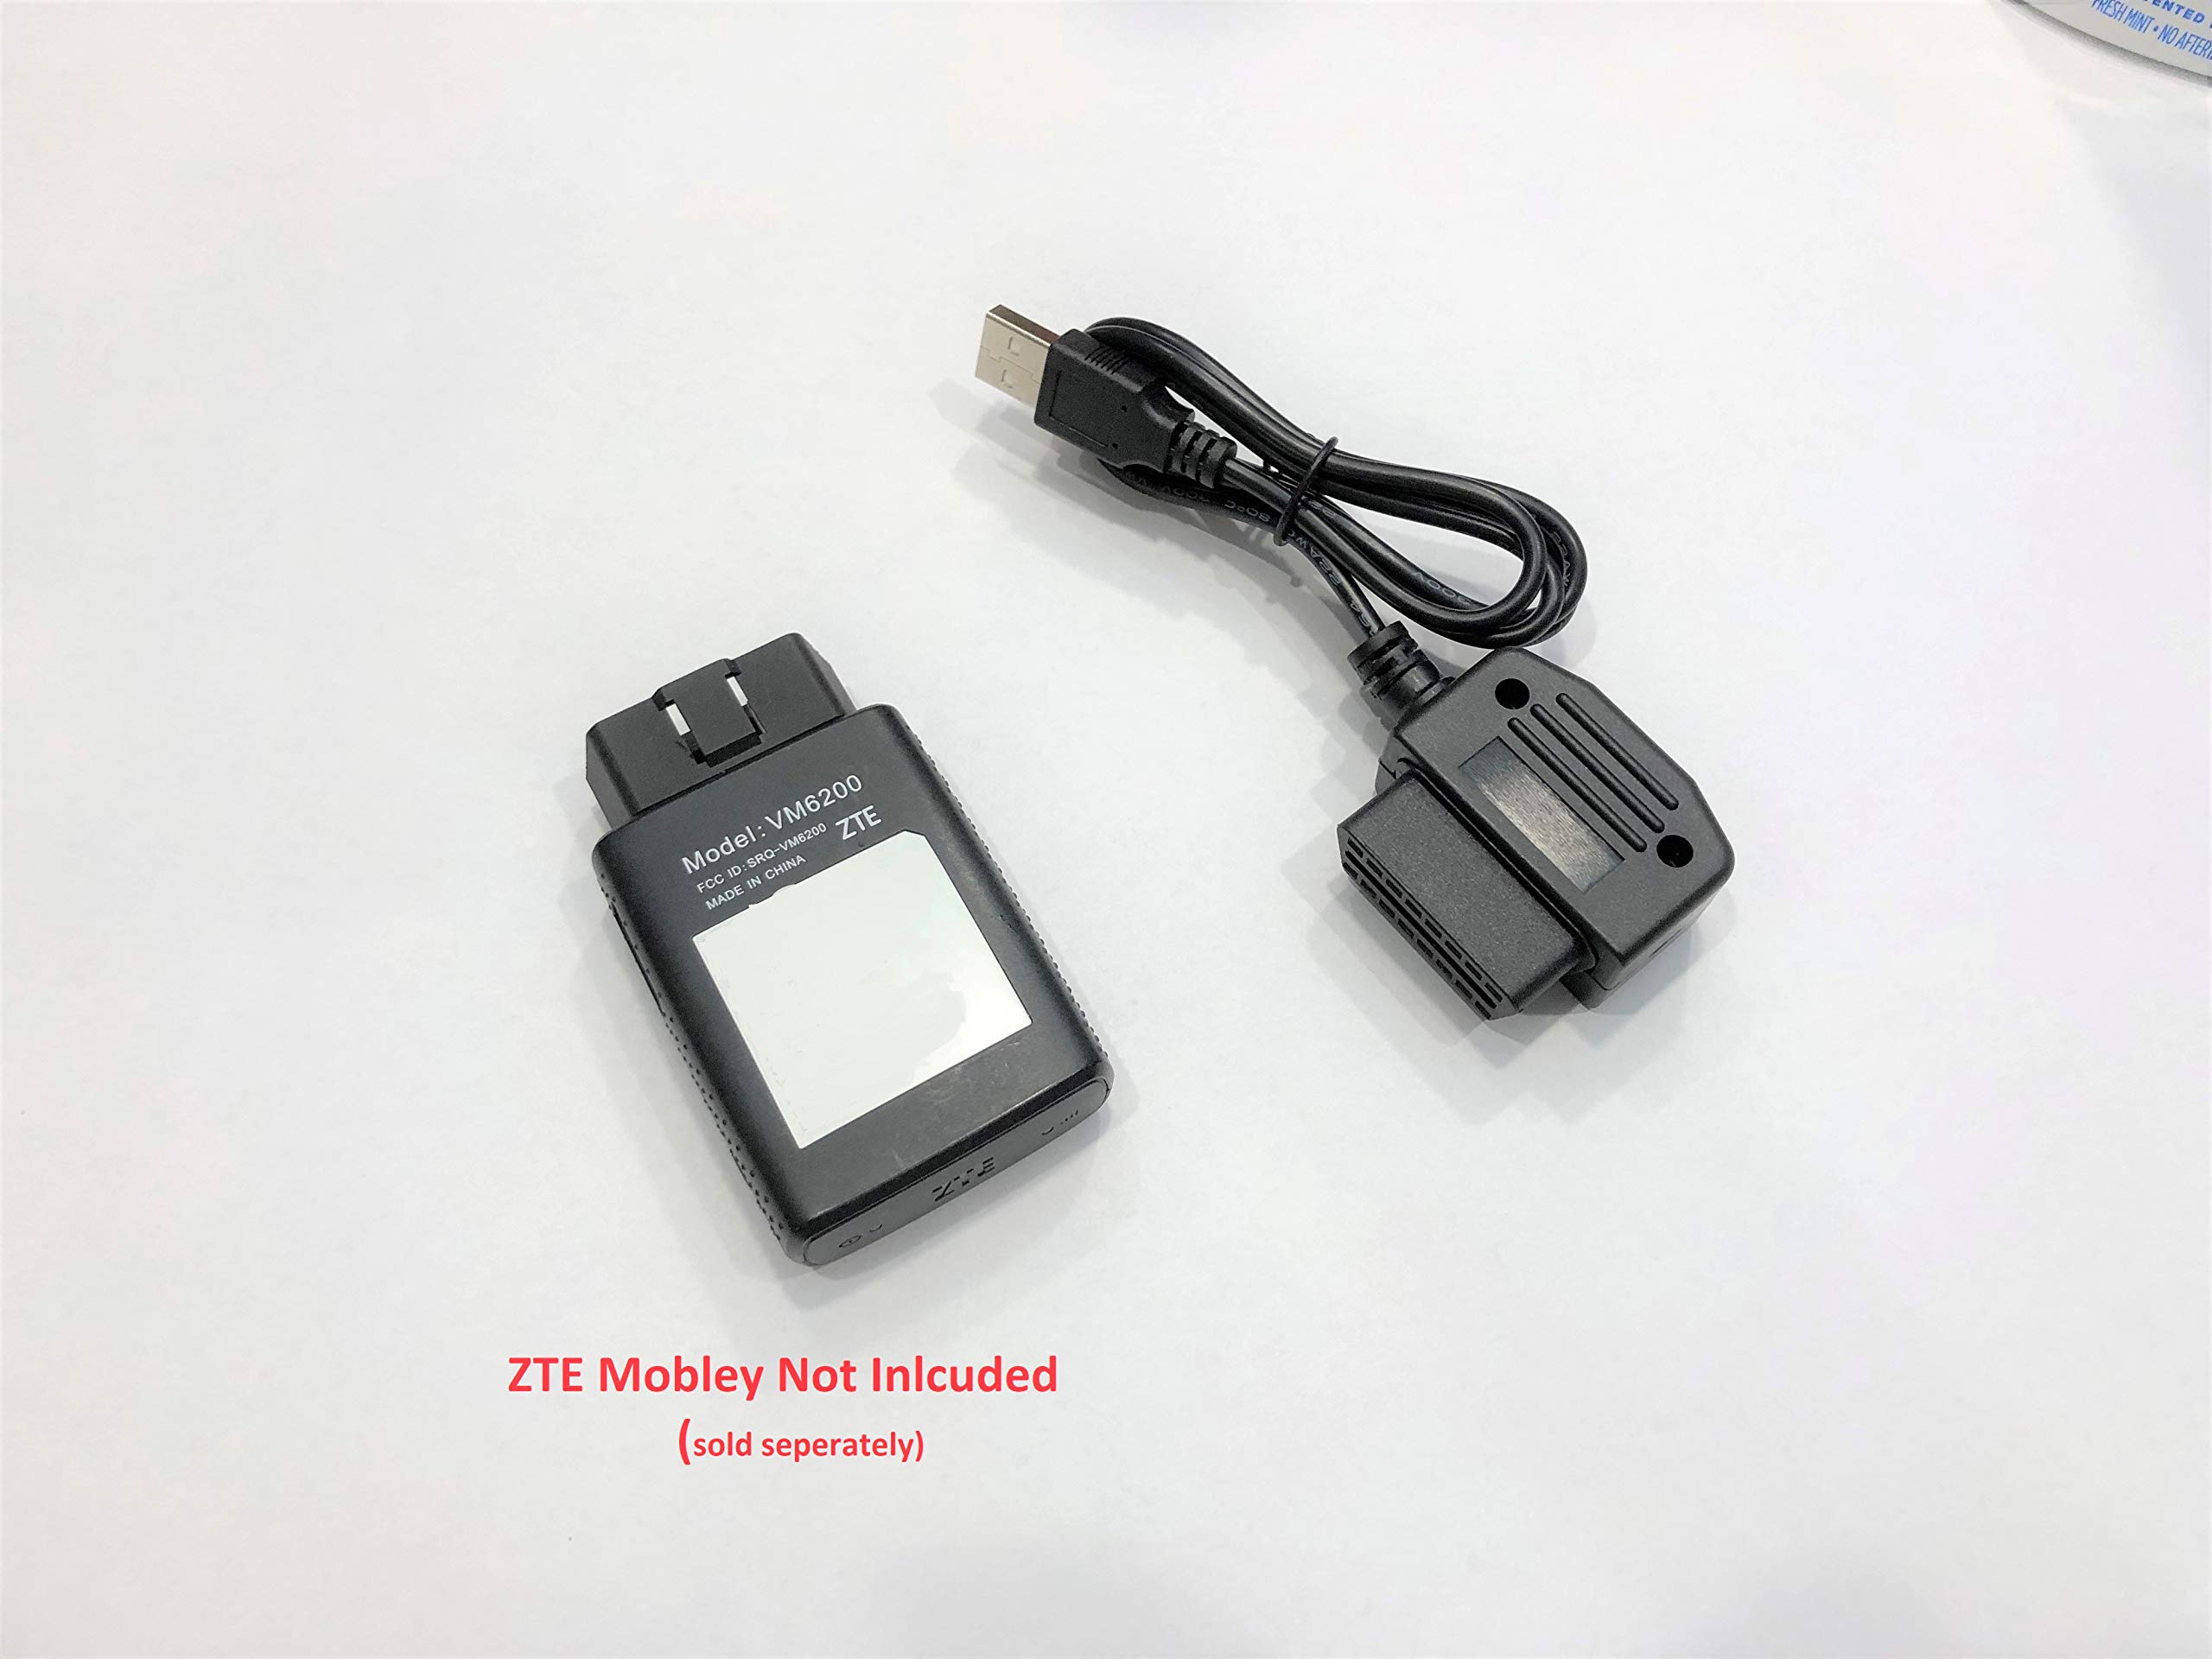 High Power 14.5V USB Mobley Adapter by Vegajf Compatibale with AT&T ZTE Mobley OBD Hotspot